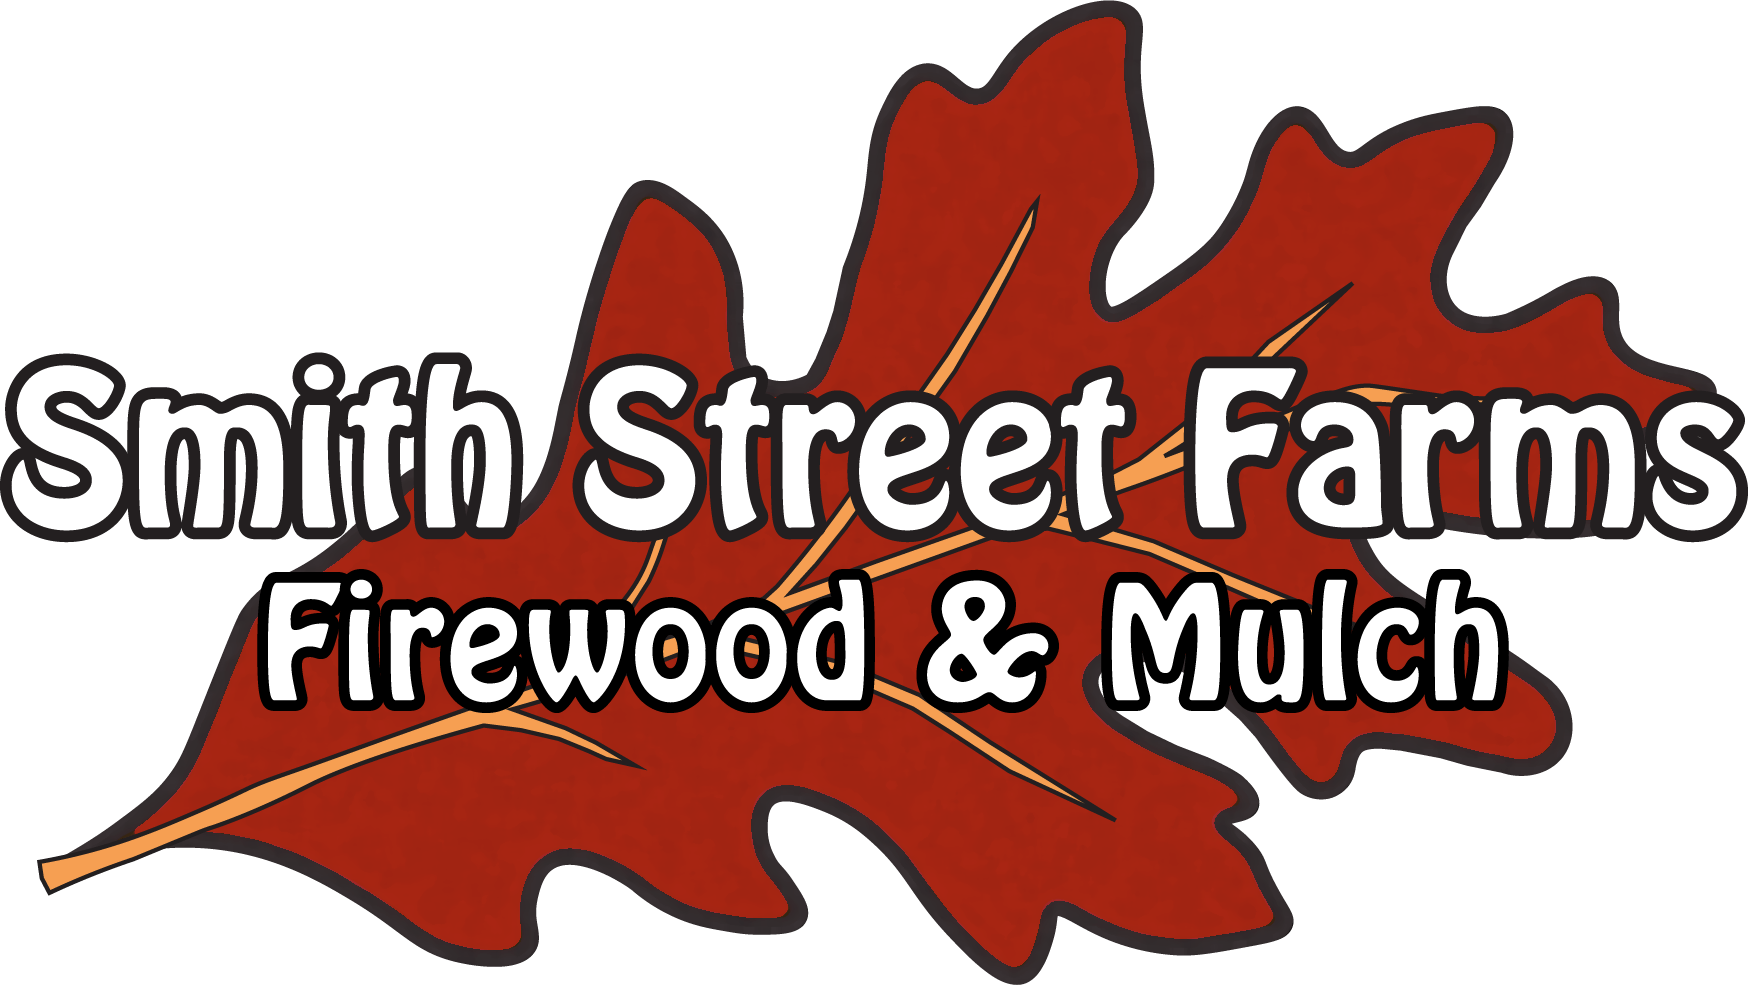 Best St Louis Firewood and Mulch Delivery